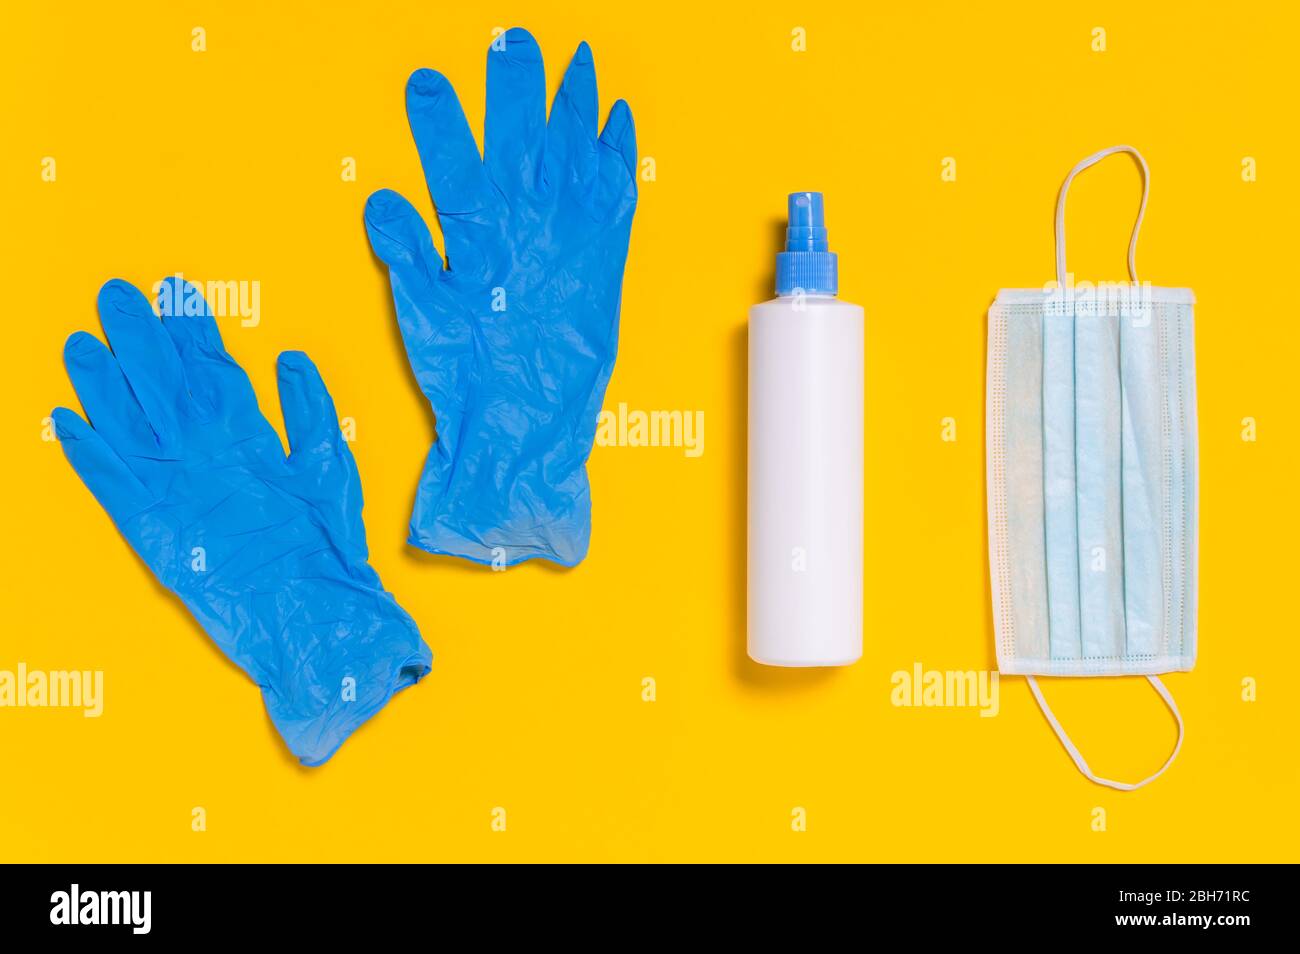 Coronavirus protection. Medical surgical mask, disinfectant or hand sanitizer and blue disposable gloves on yellow background. Hygiene measures to pre Stock Photo